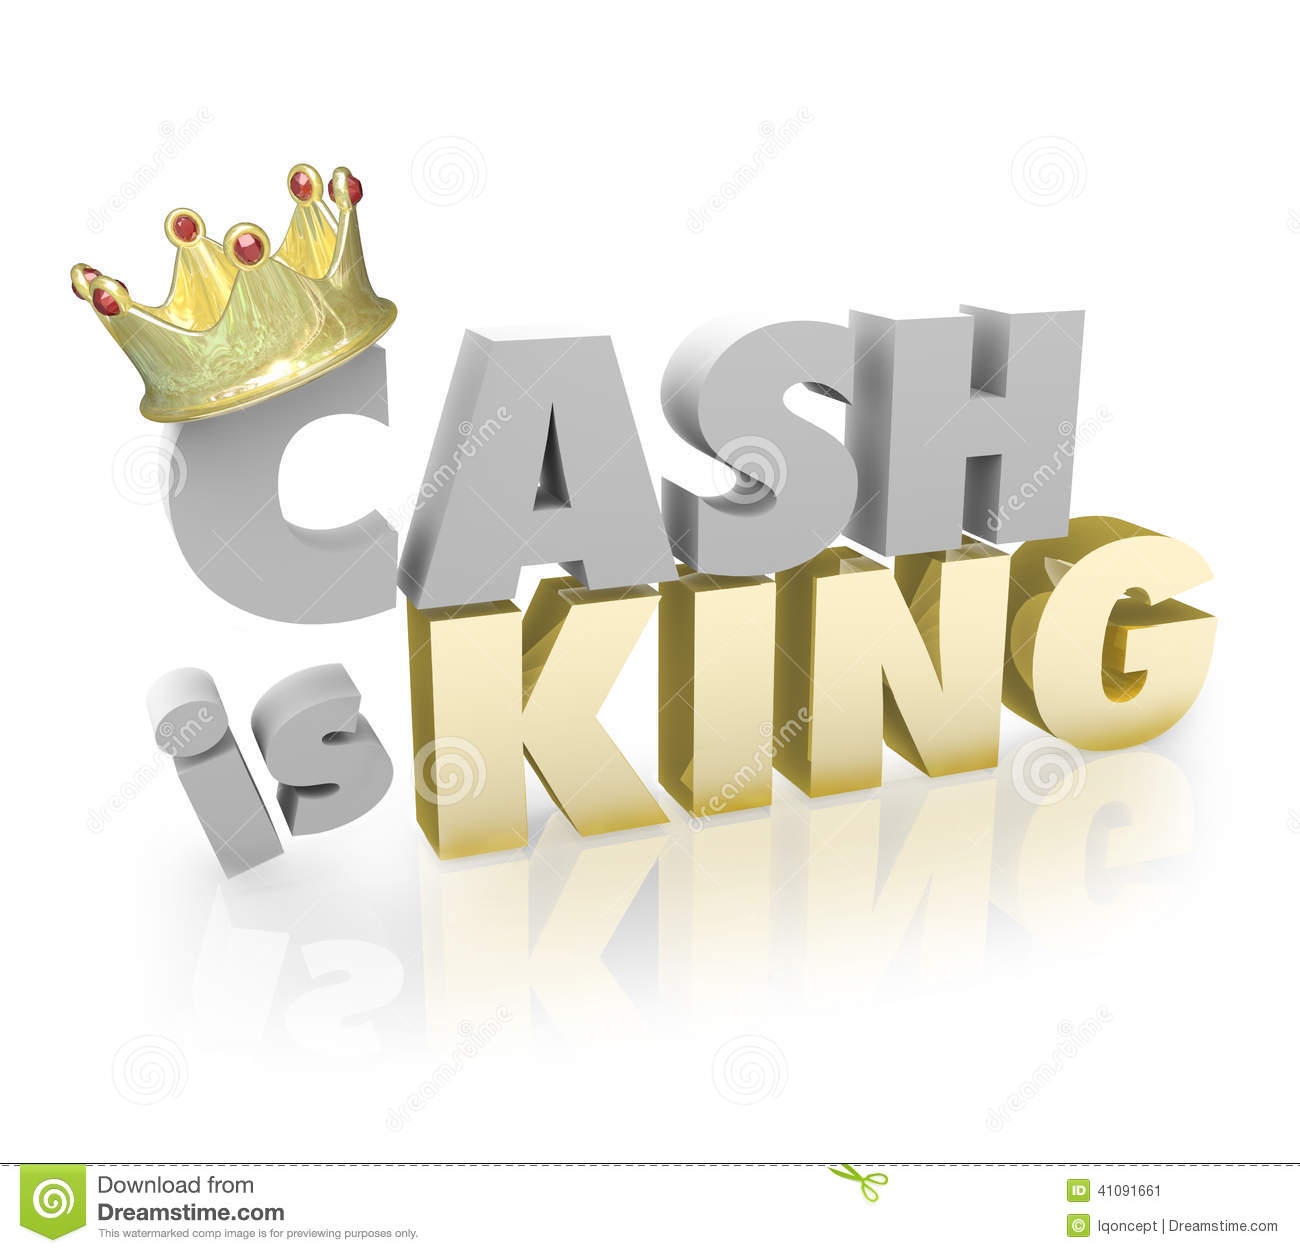 Cash Is King With Gold Crown On The Word To Illustrate The Buying